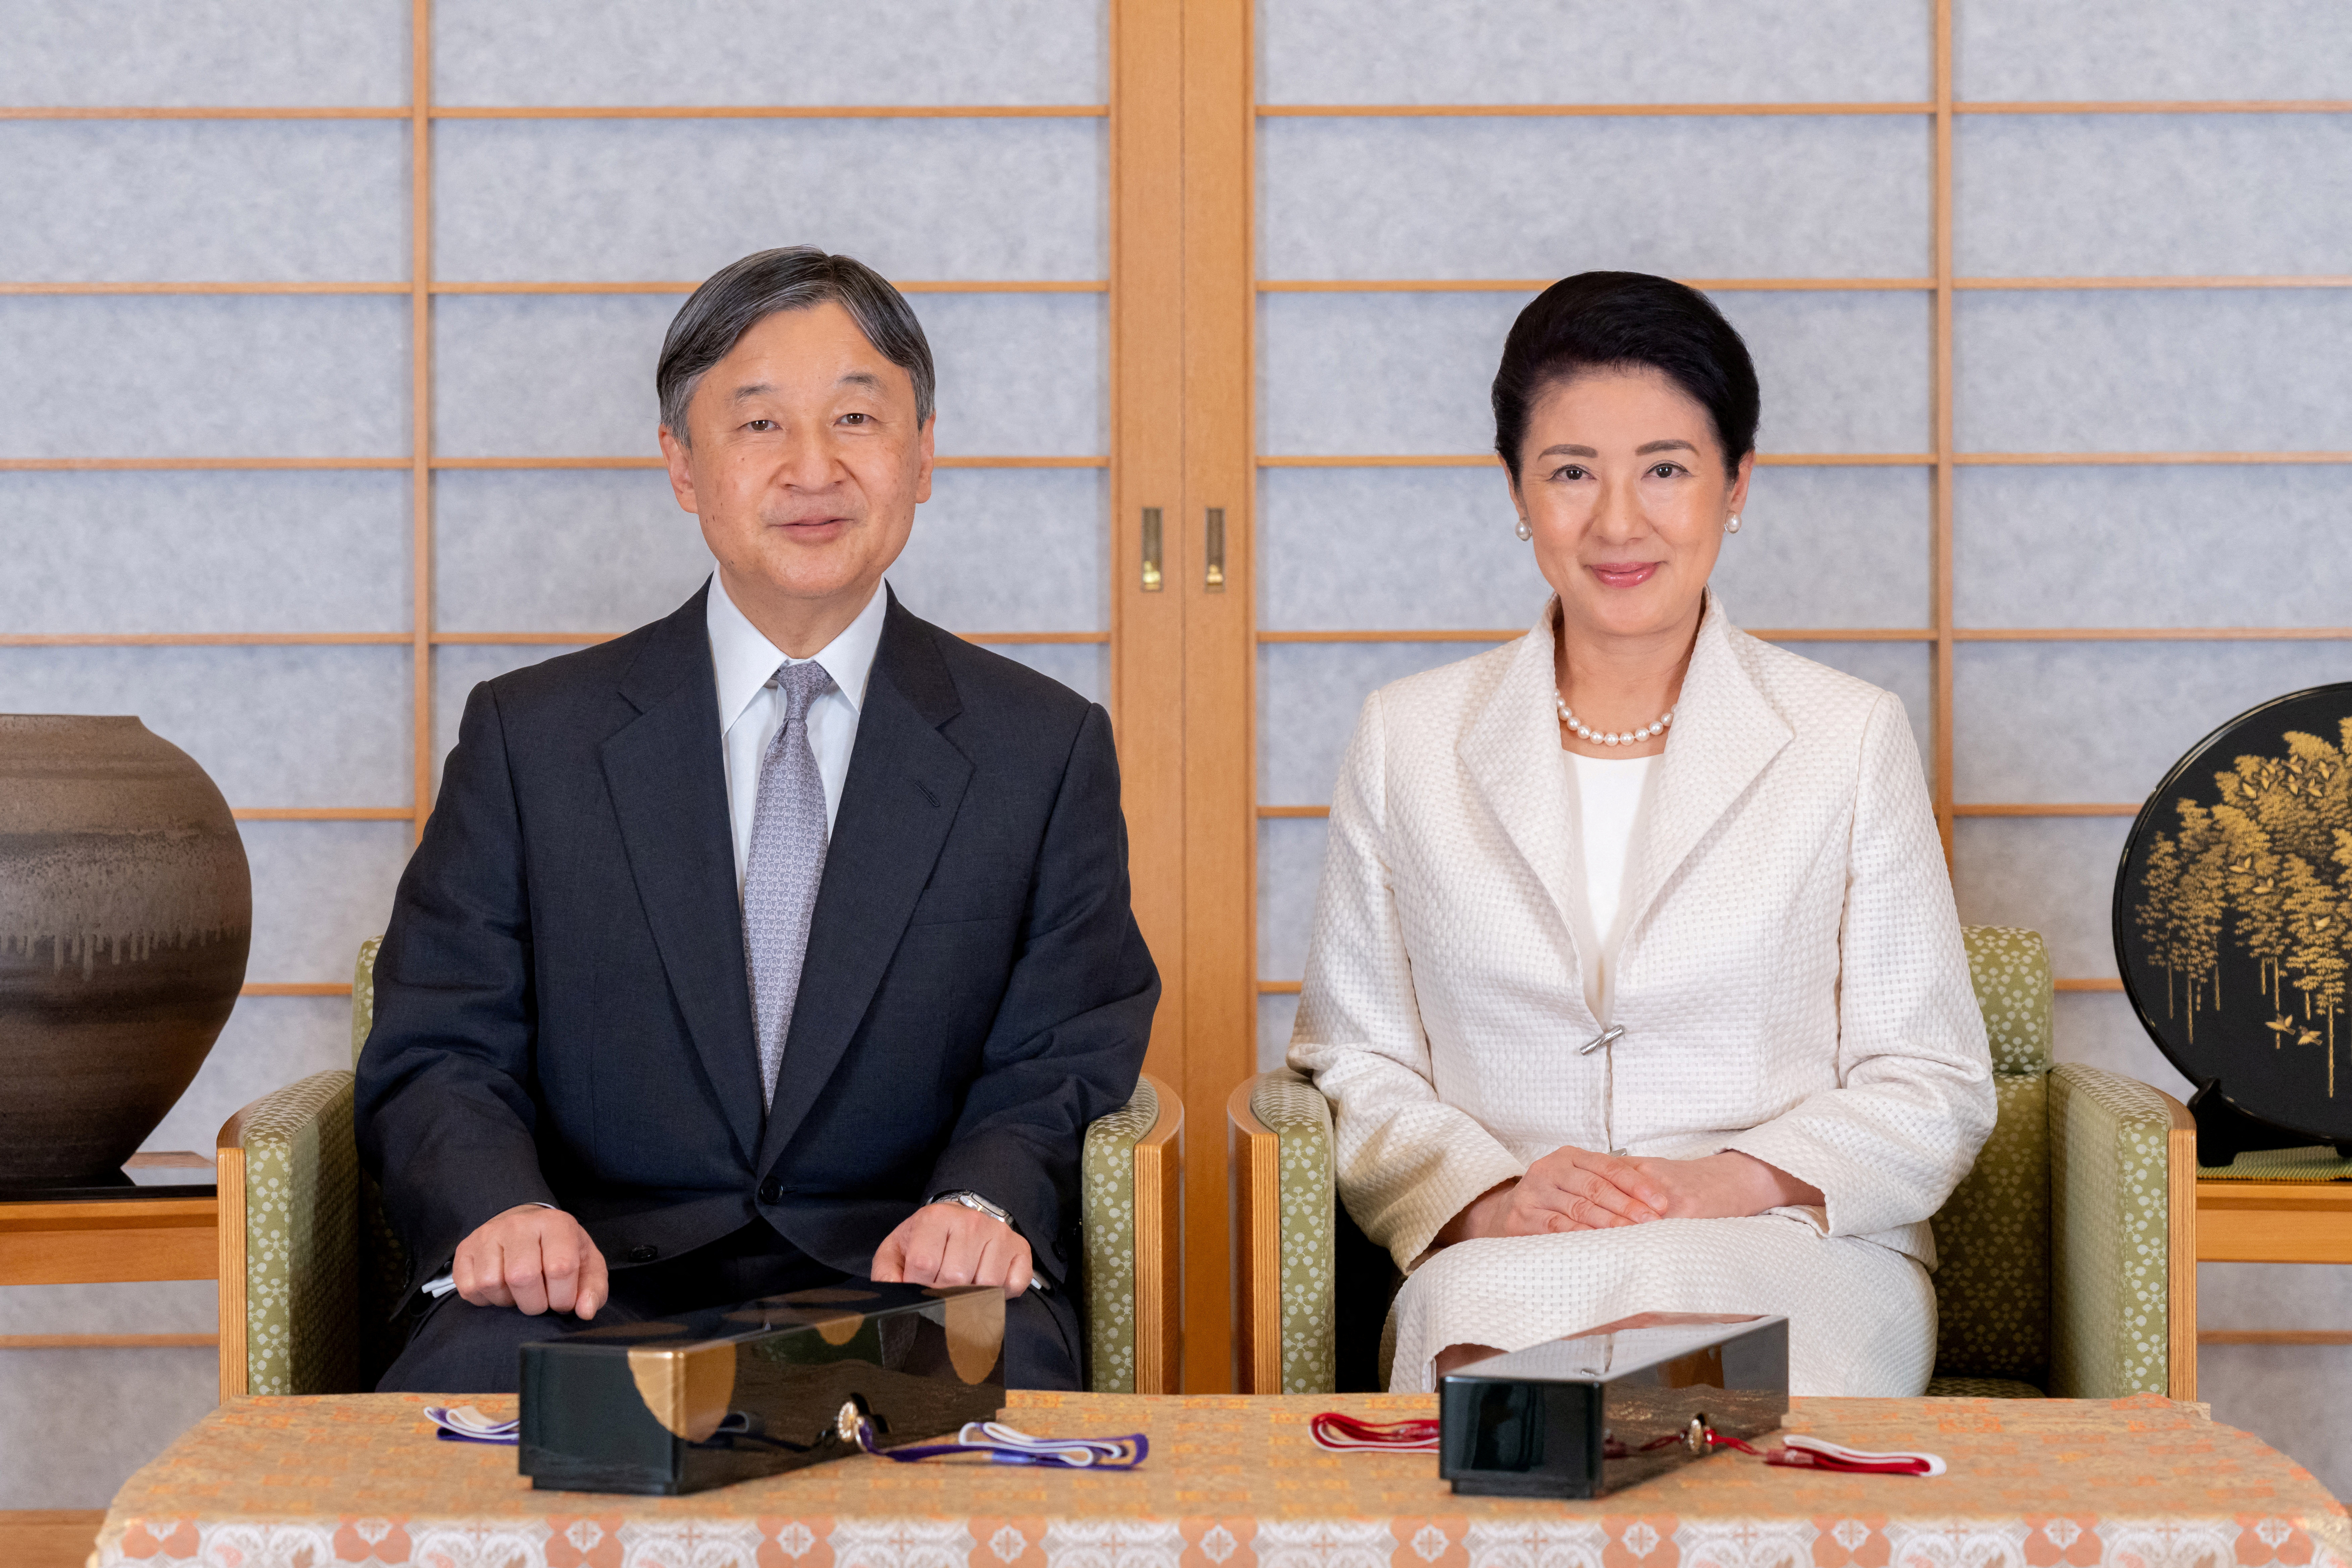 Japan's Emperor Naruhito poses for a photograph with Empress Masako at the Imperial Palace in Tokyo